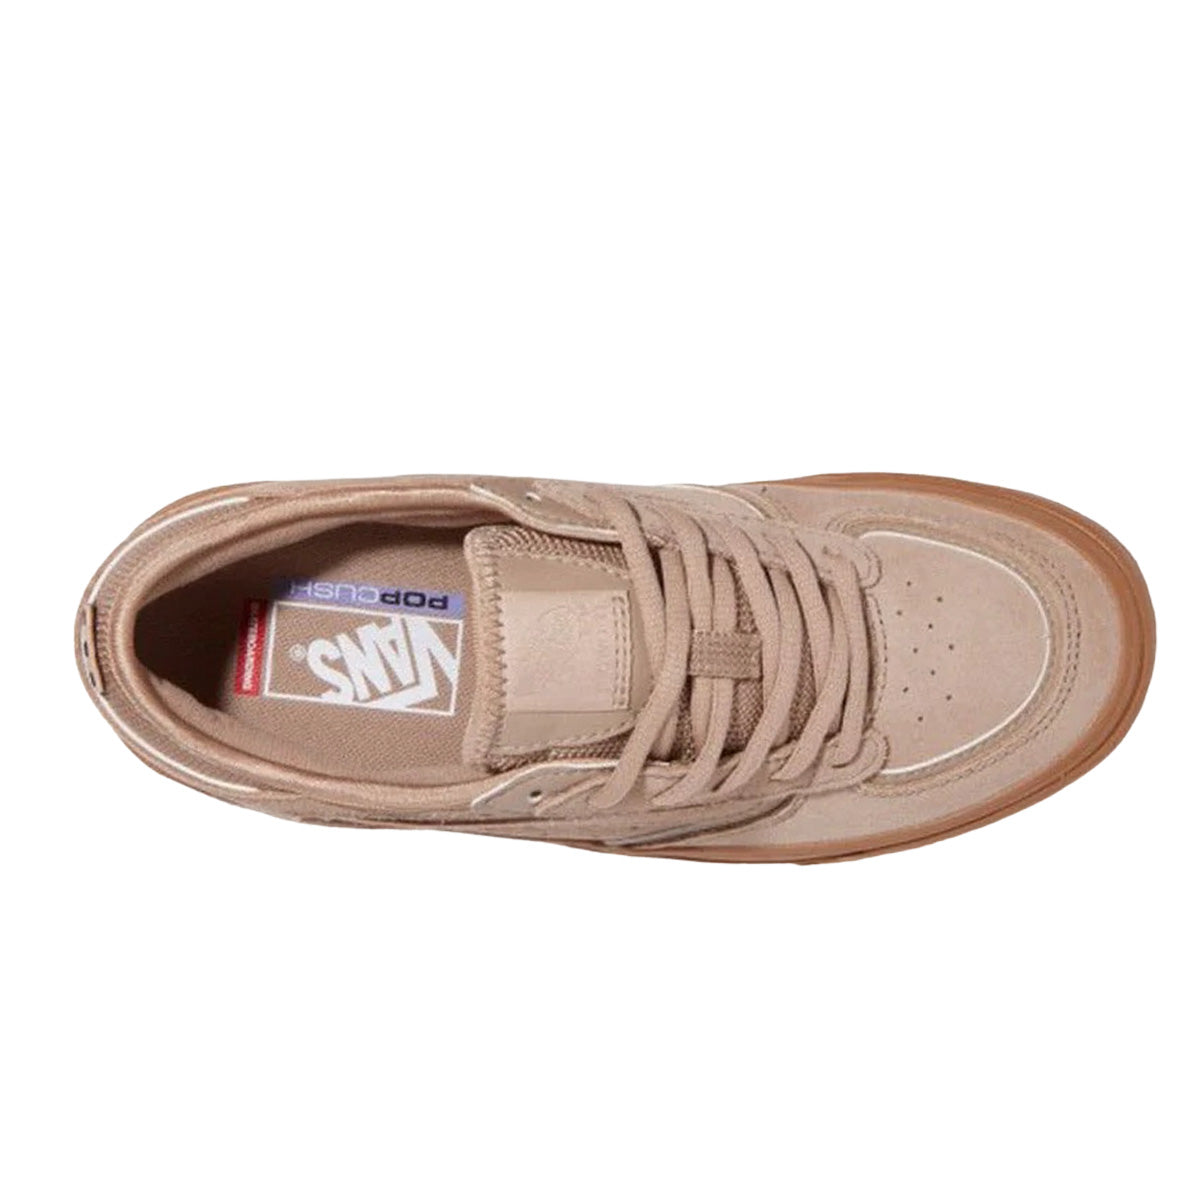 Tan coloured Rowley Vans low top laced skate shoes with gum sole. Free uk shipping over £50